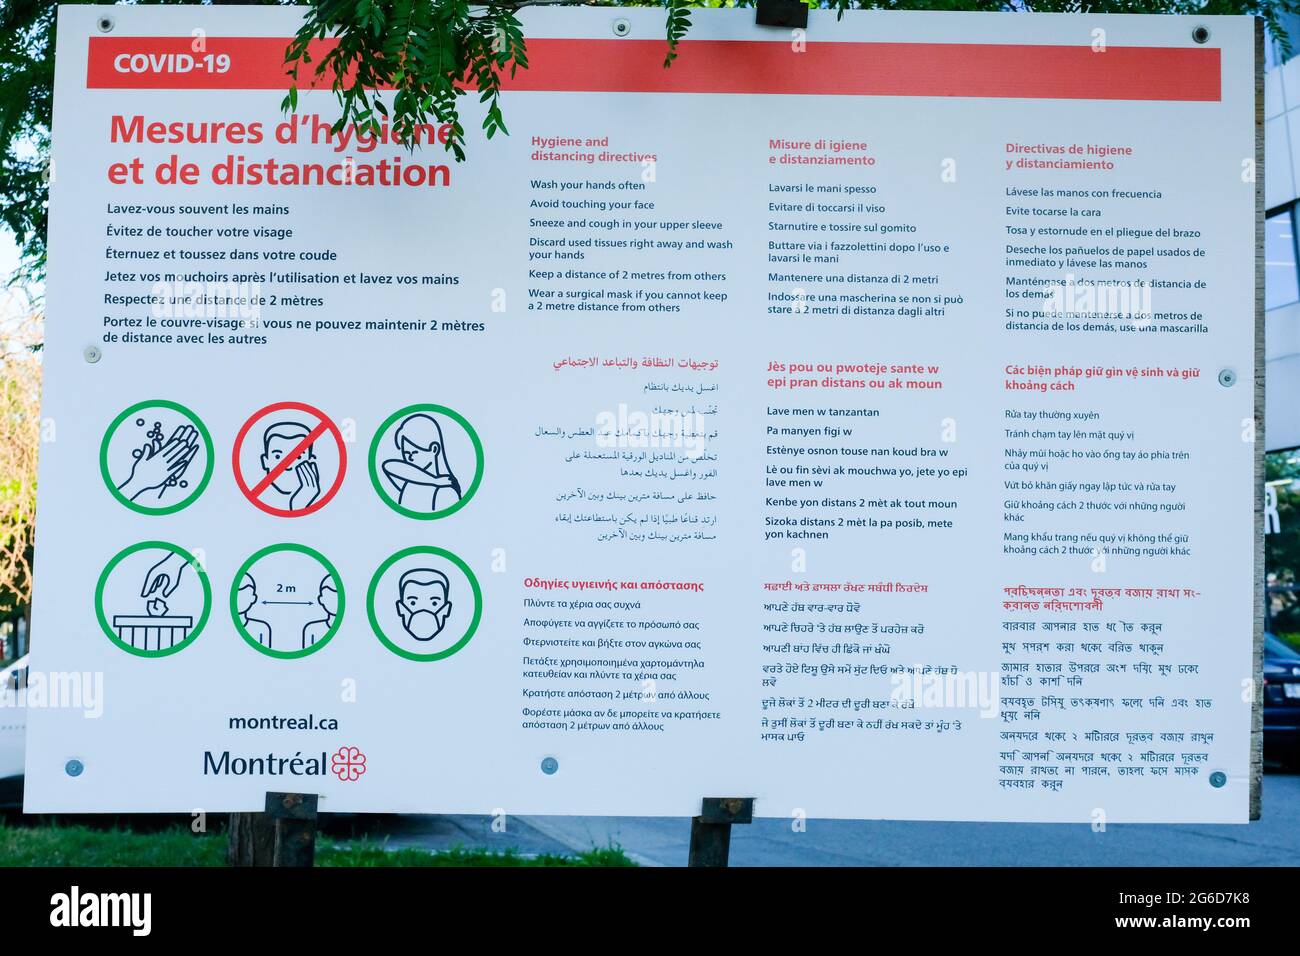 Covid Prevention billboard in many languages, Montreal Canada Stock Photo